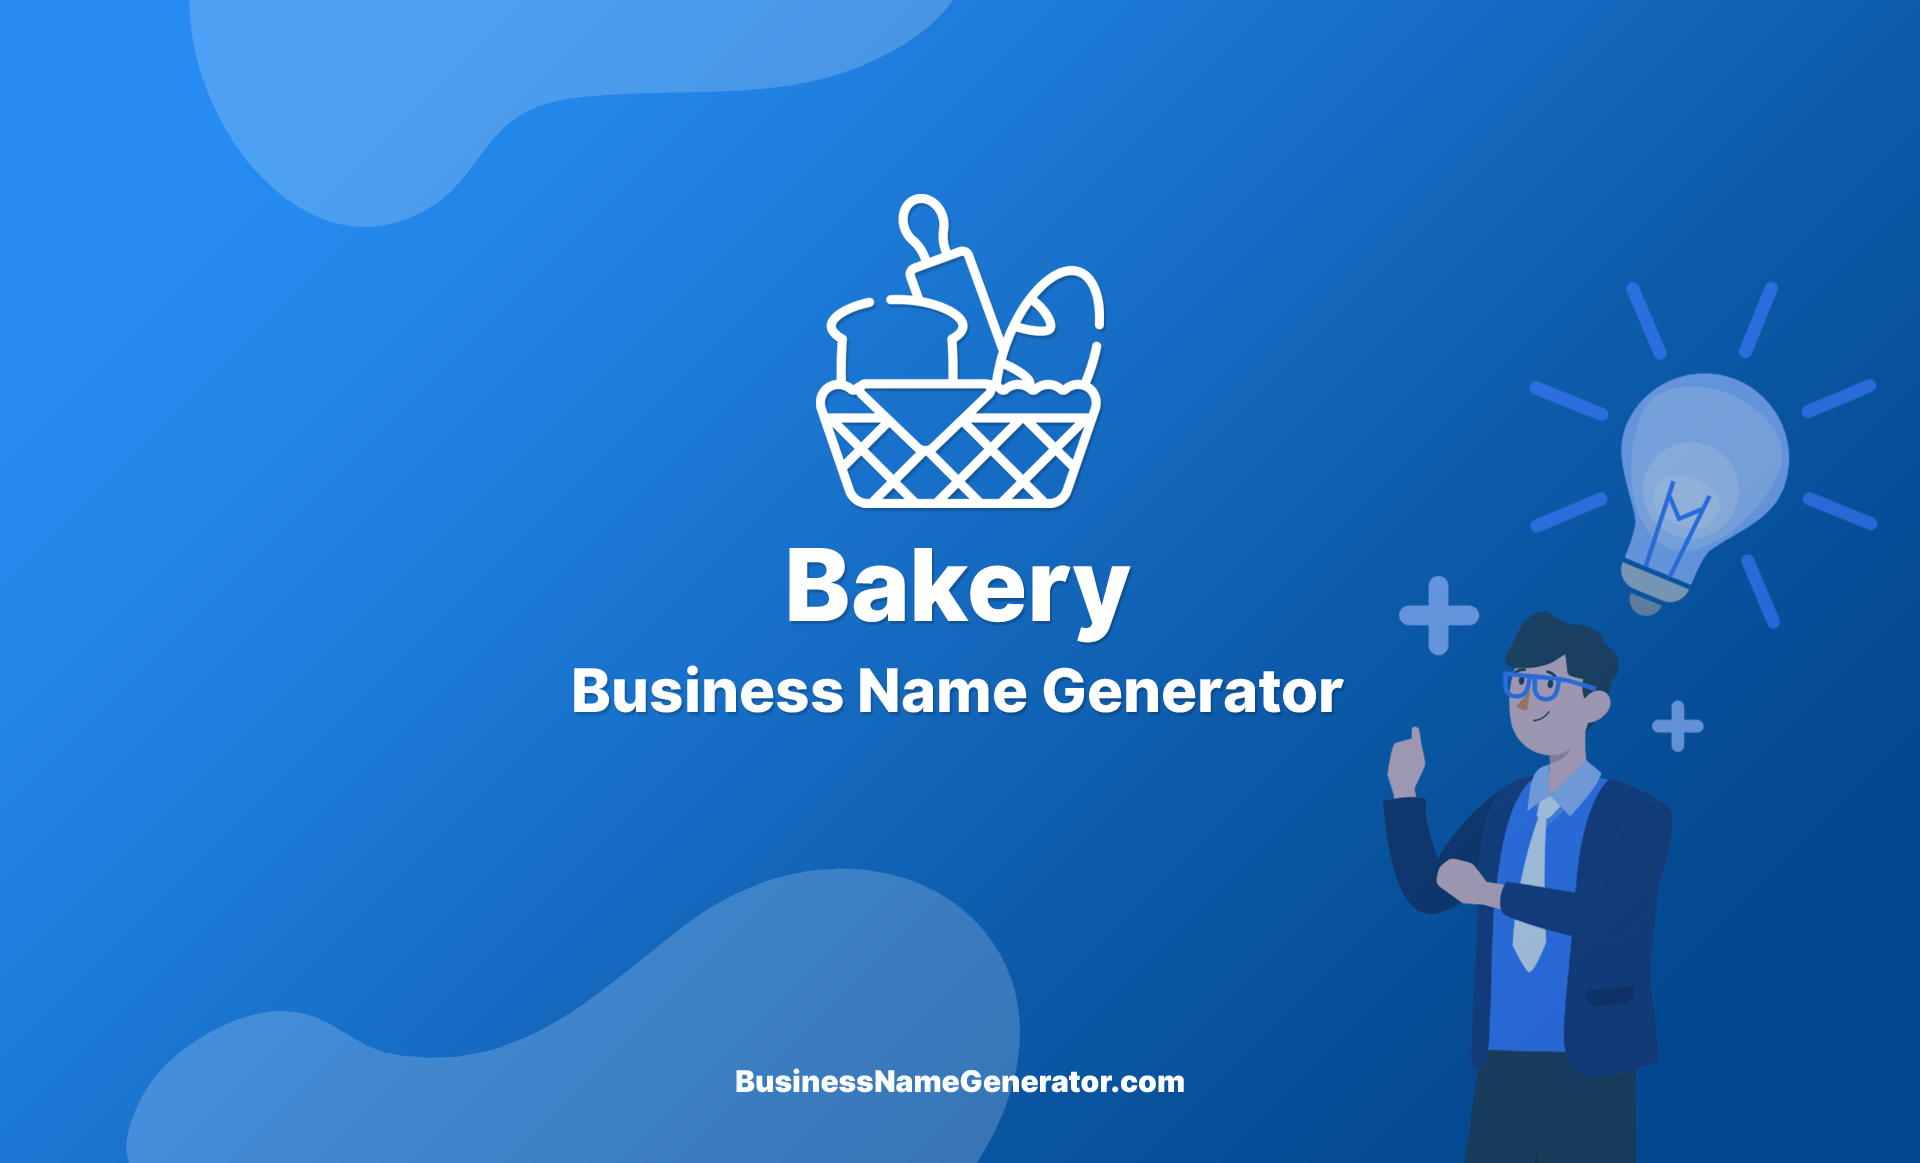 Bakery Business Name Generator, Ideas & Guide